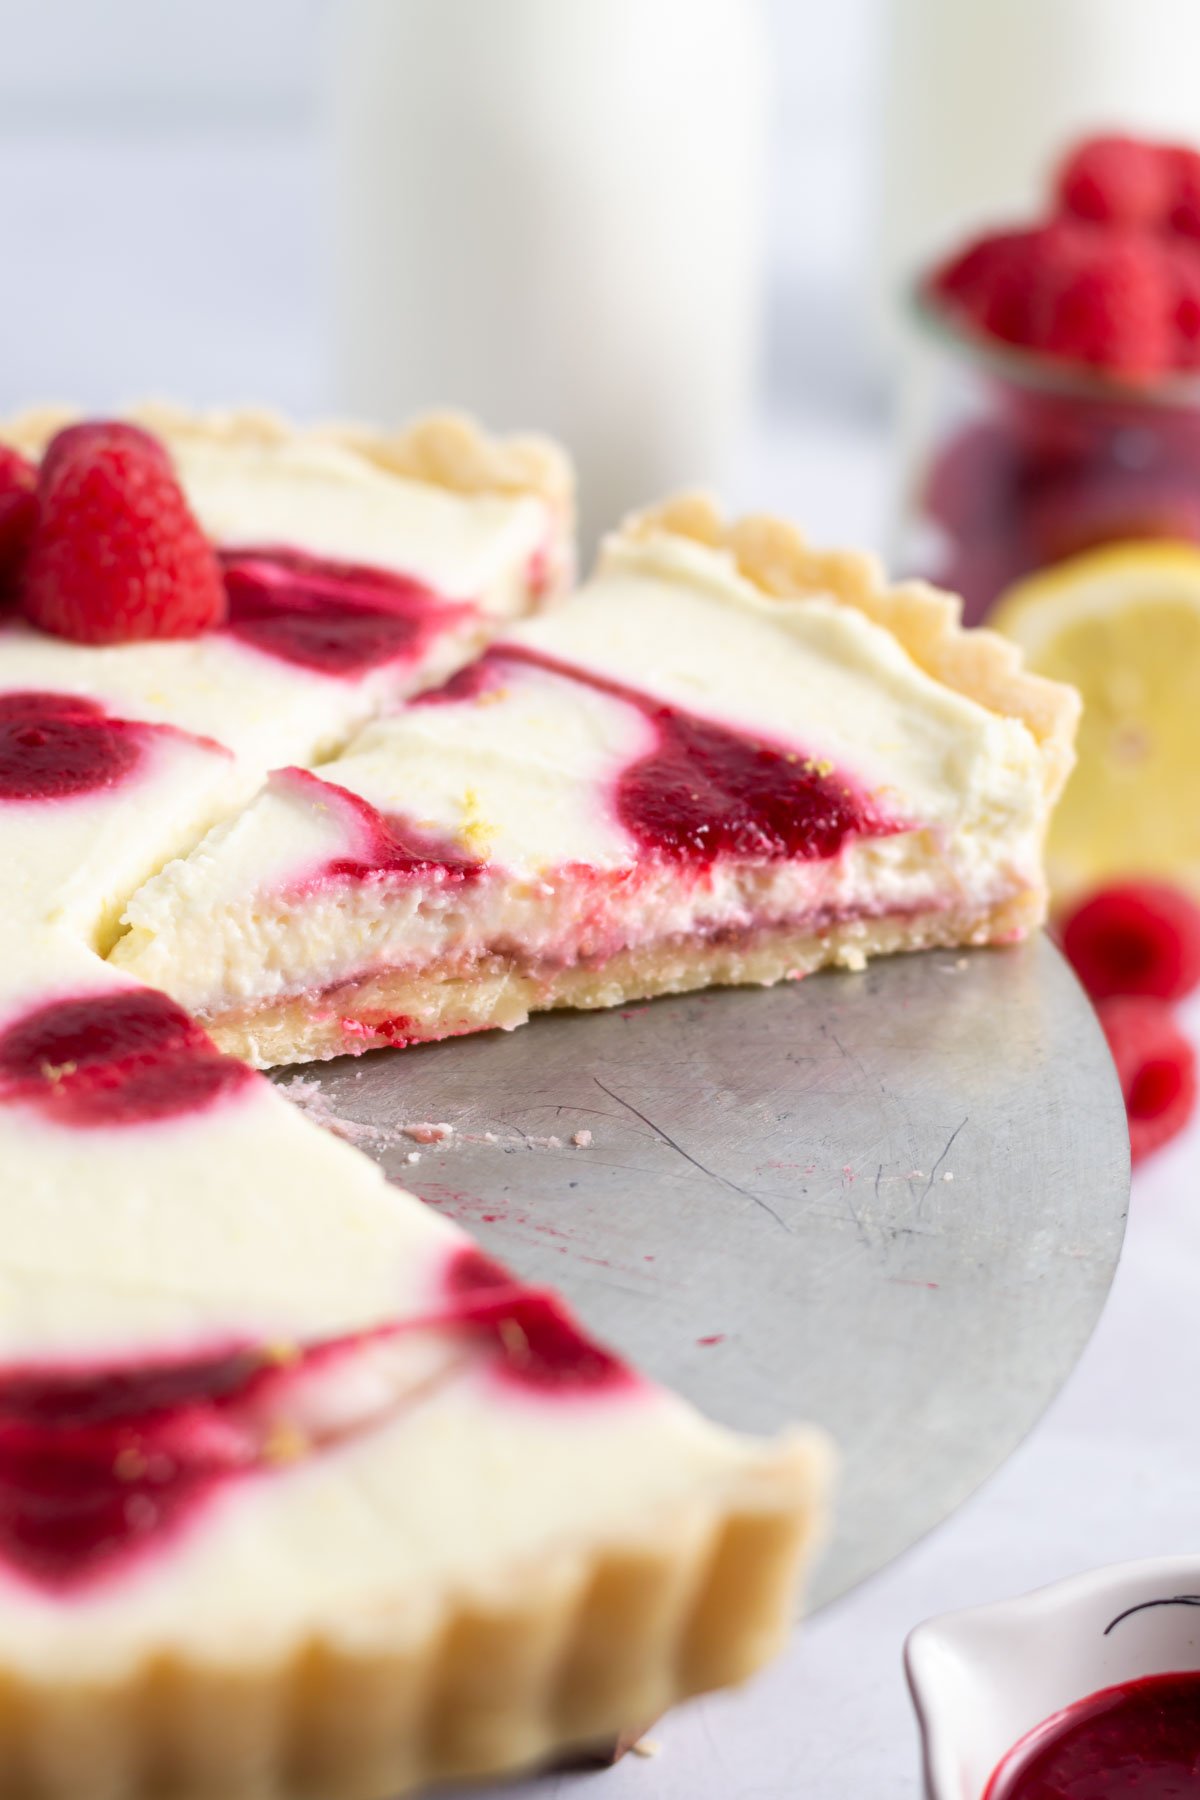 slices of tart showing layers of shortbread crust, lemon filling and raspberry coulis topping